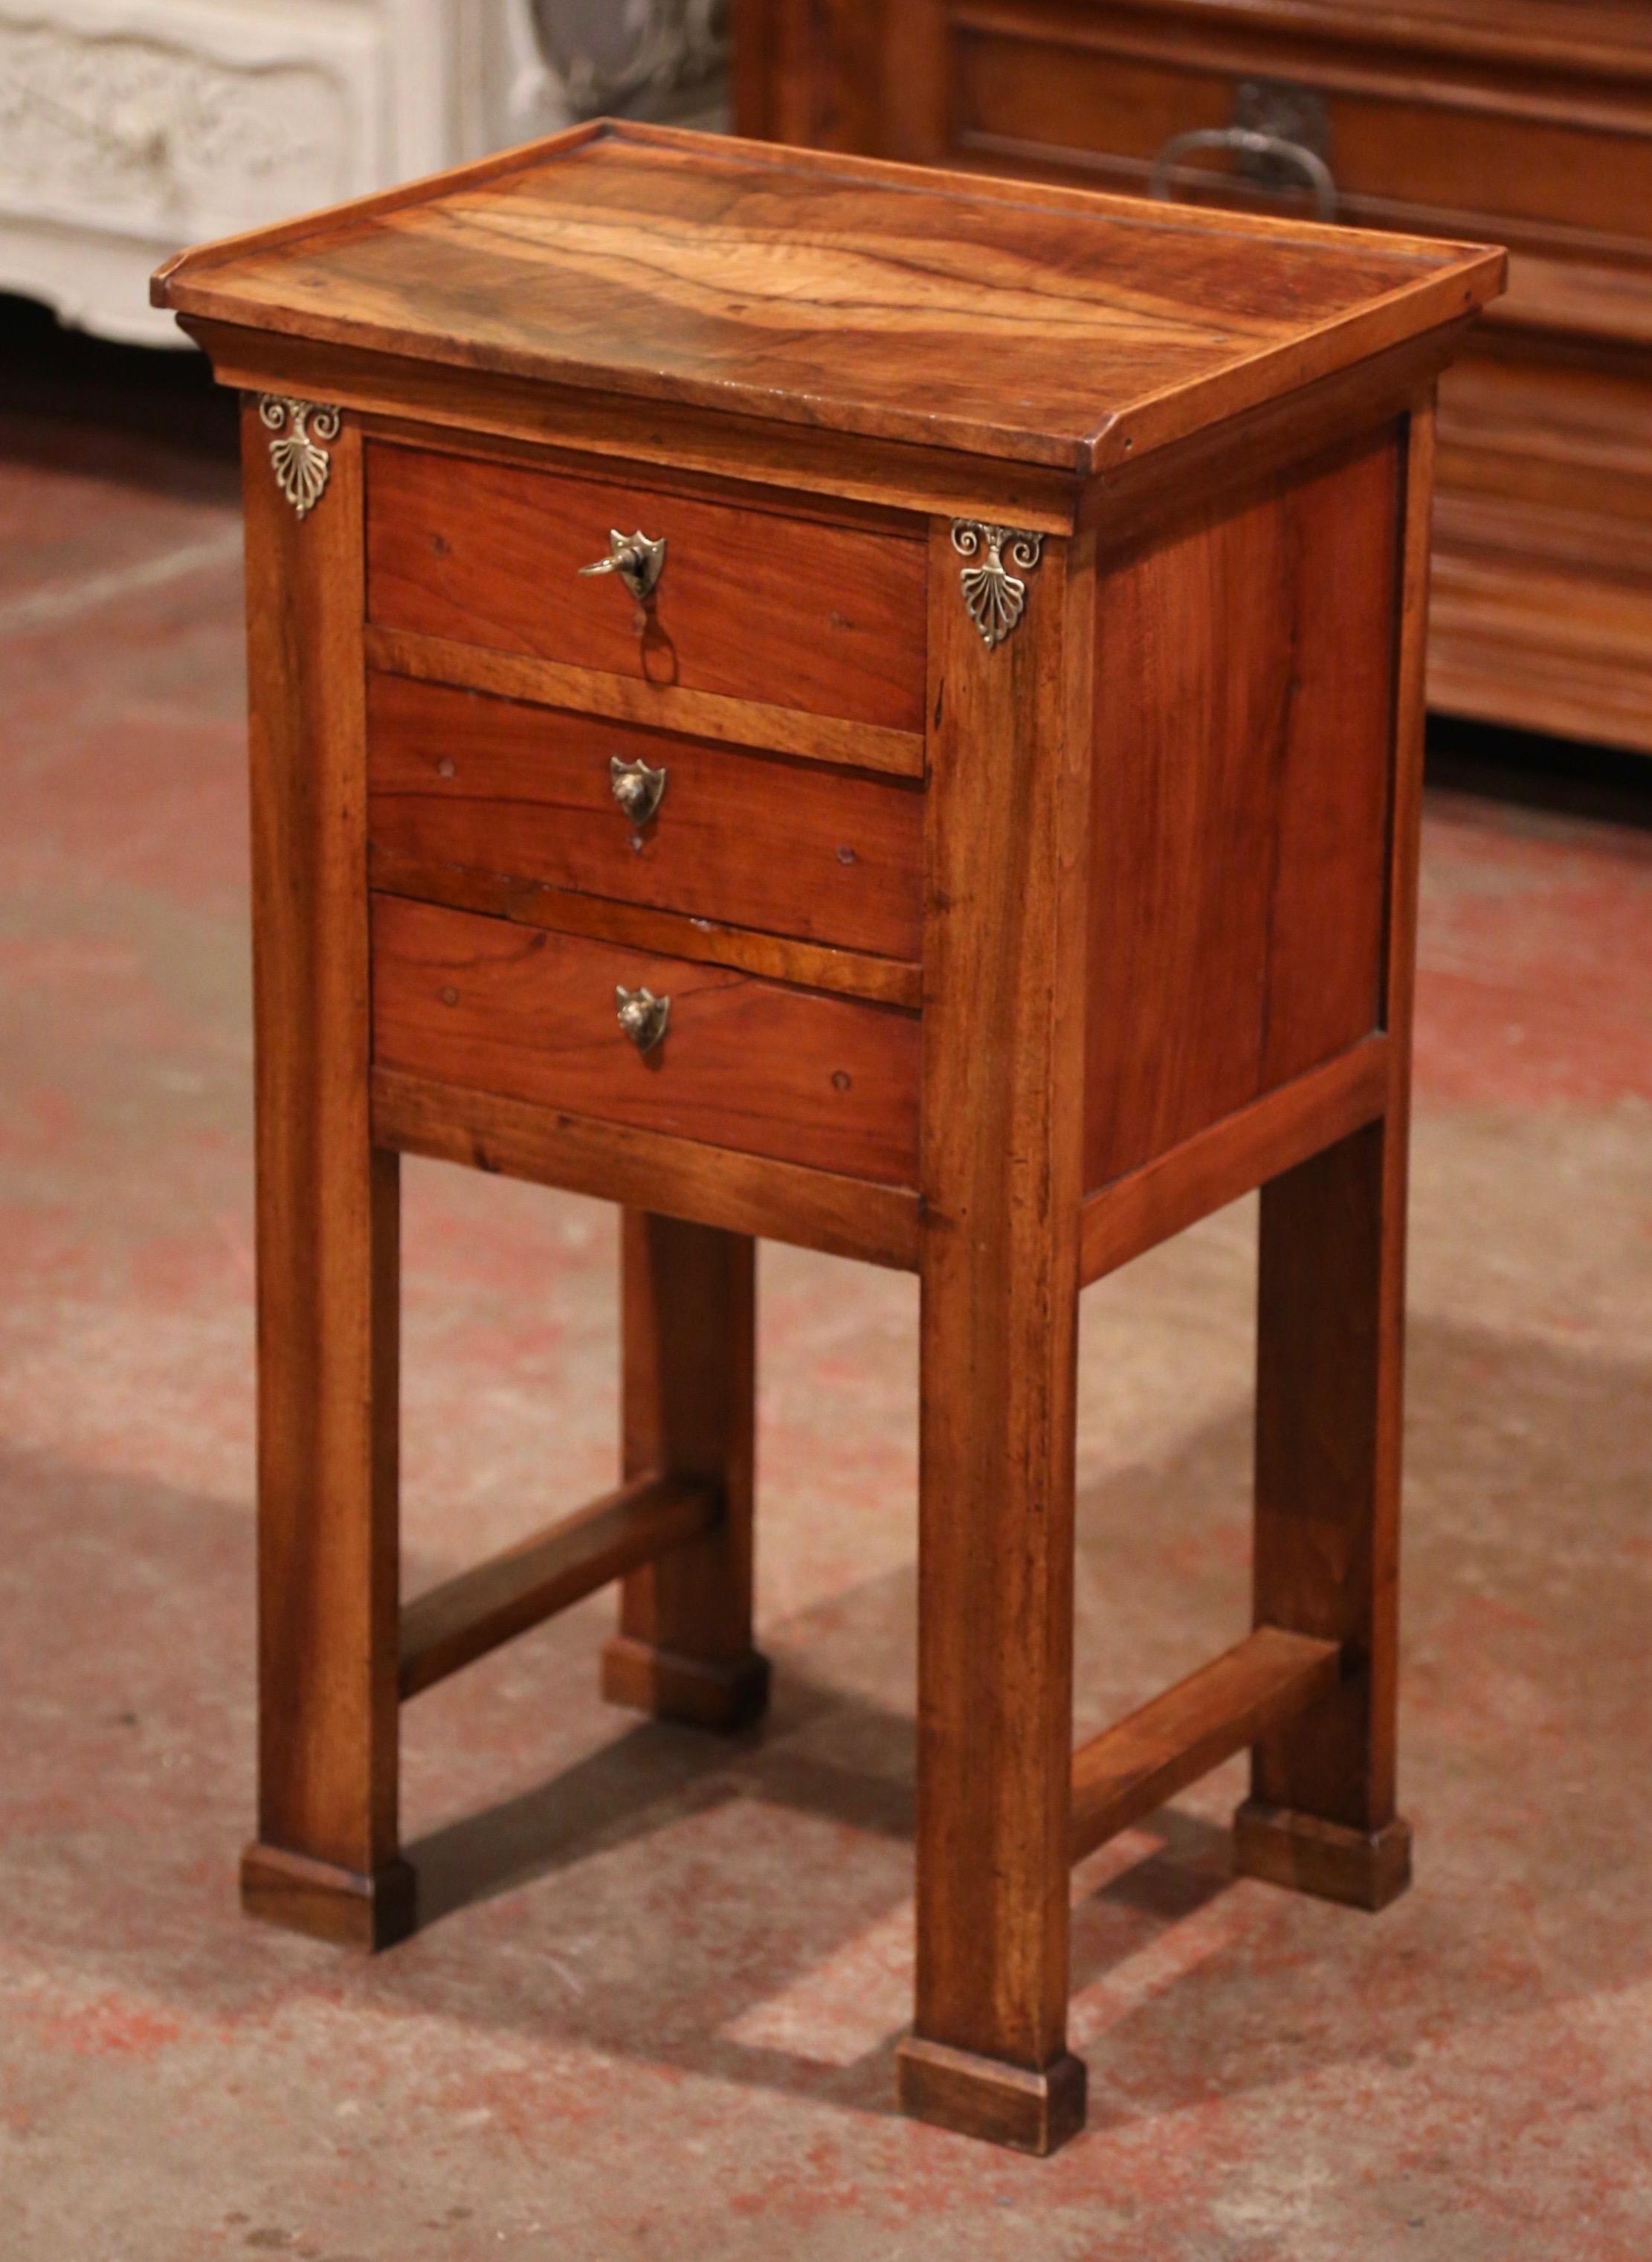 This elegant antique nightstand was crafted in France, circa 1850. The traditional fruit wood cabinet stands on four straight legs terminated with plinth feet and embellished with decorative brass mounts; the small chest features three drawers